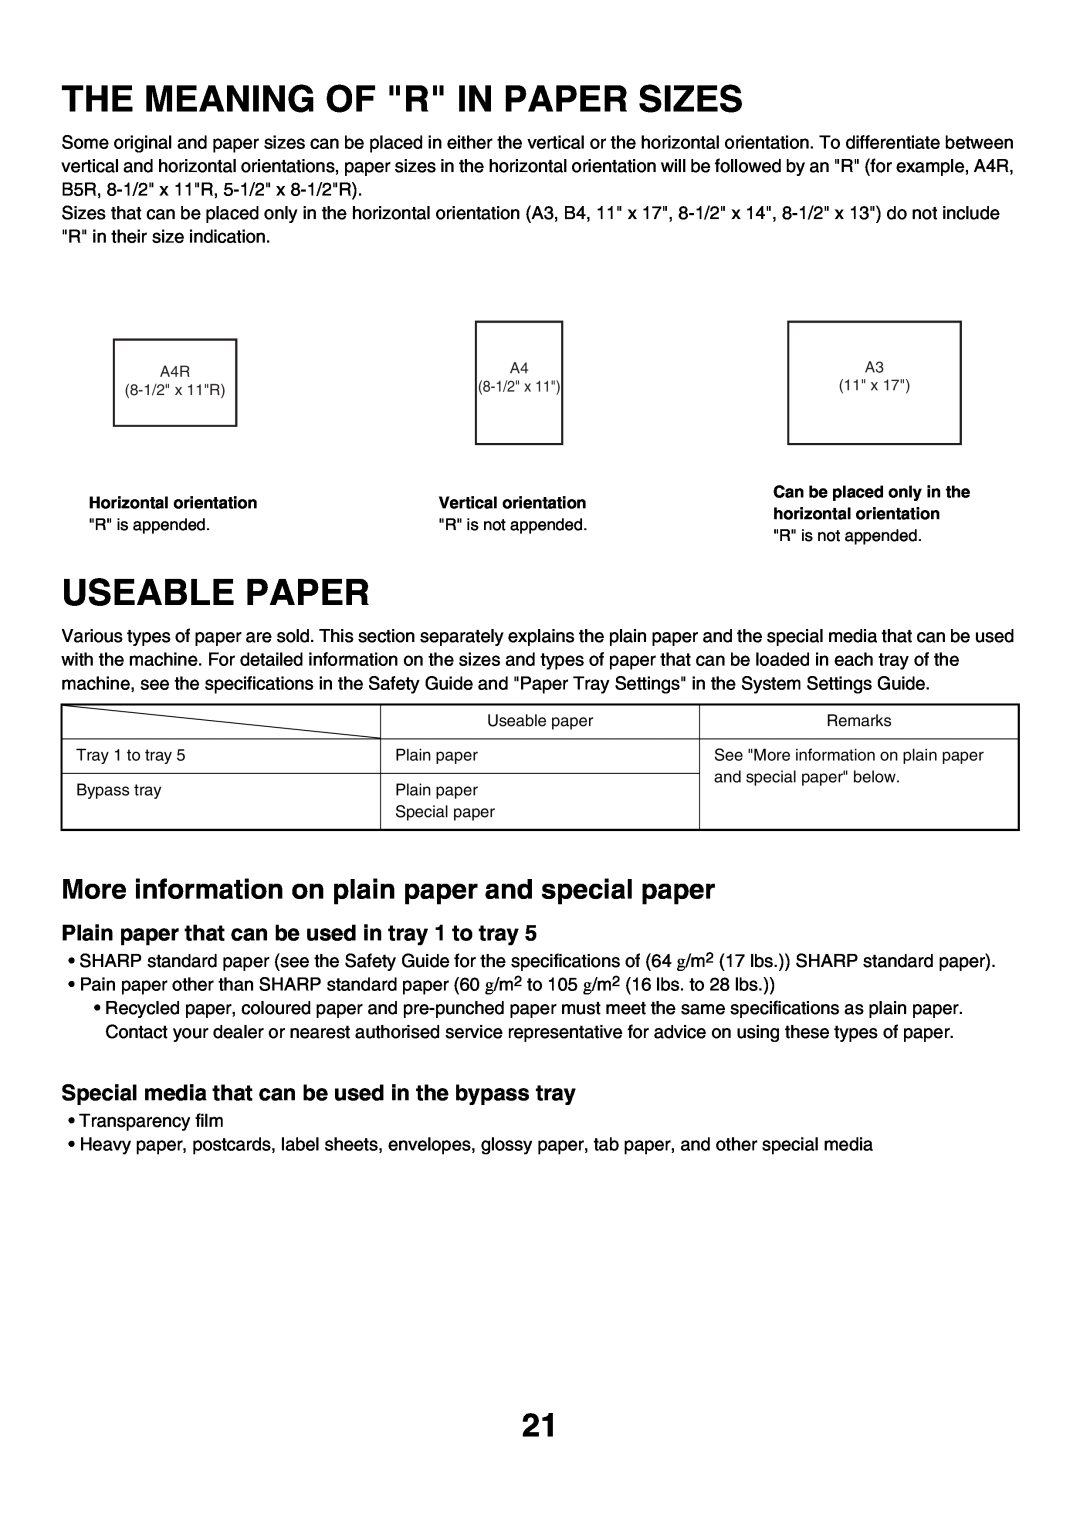 Sharp MX-2300G, MX-2700G The Meaning Of R In Paper Sizes, Useable Paper, More information on plain paper and special paper 